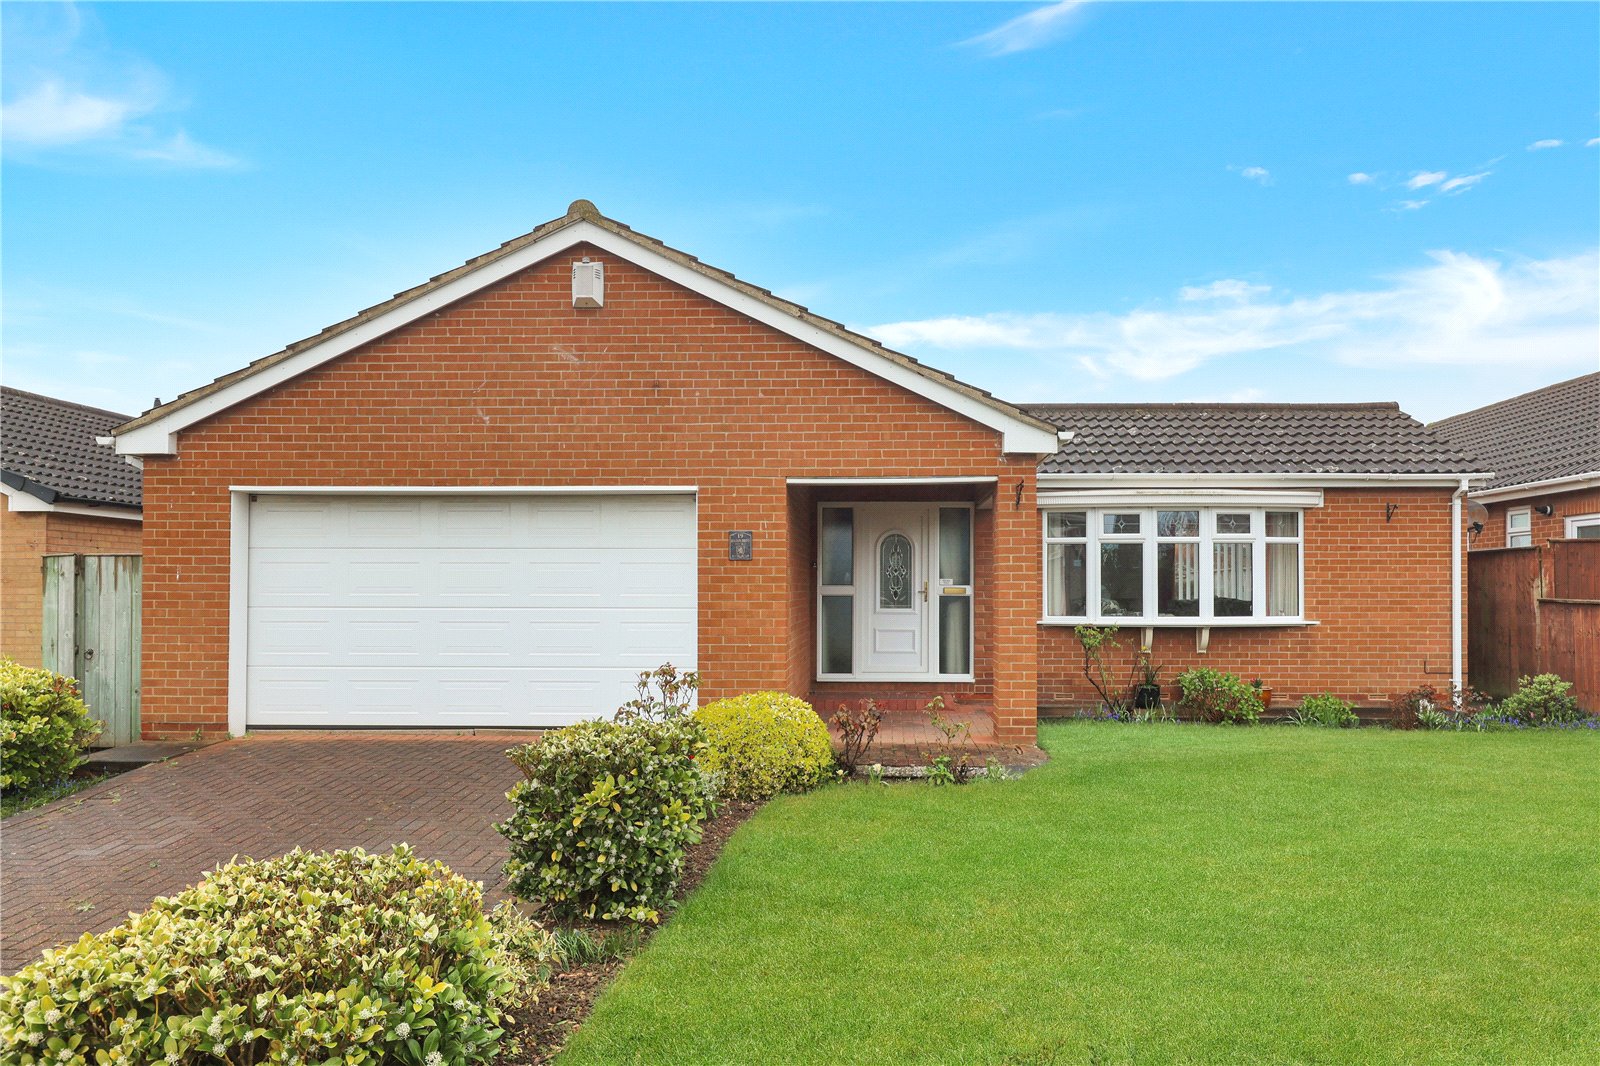 3 bed bungalow for sale in Boston Drive, Marton 1